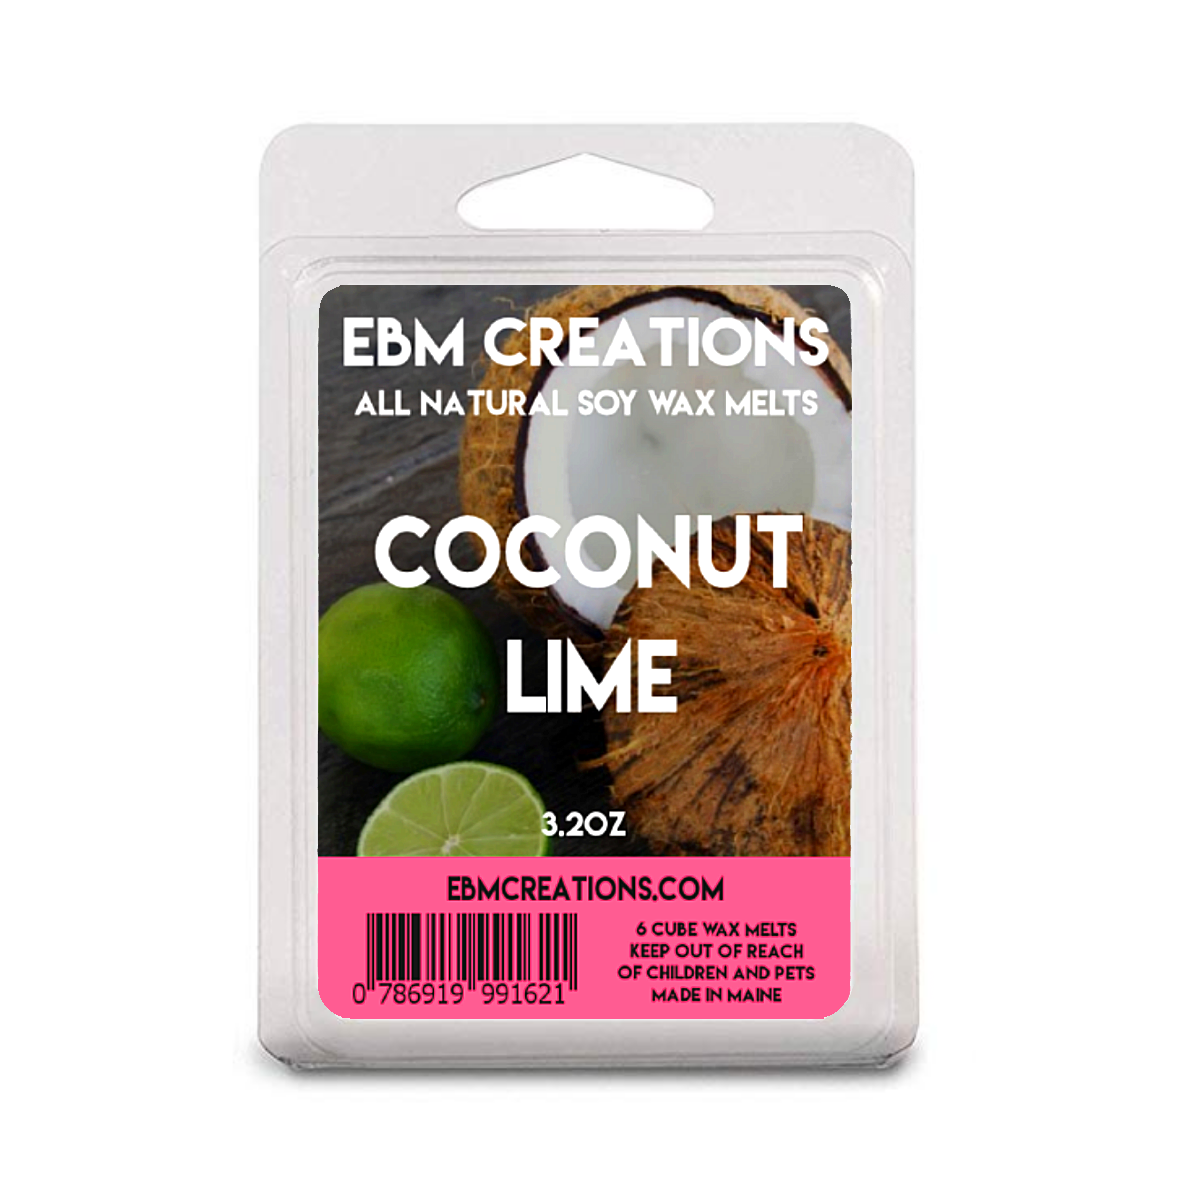 Coconut Lime - 3.2 oz Clamshell